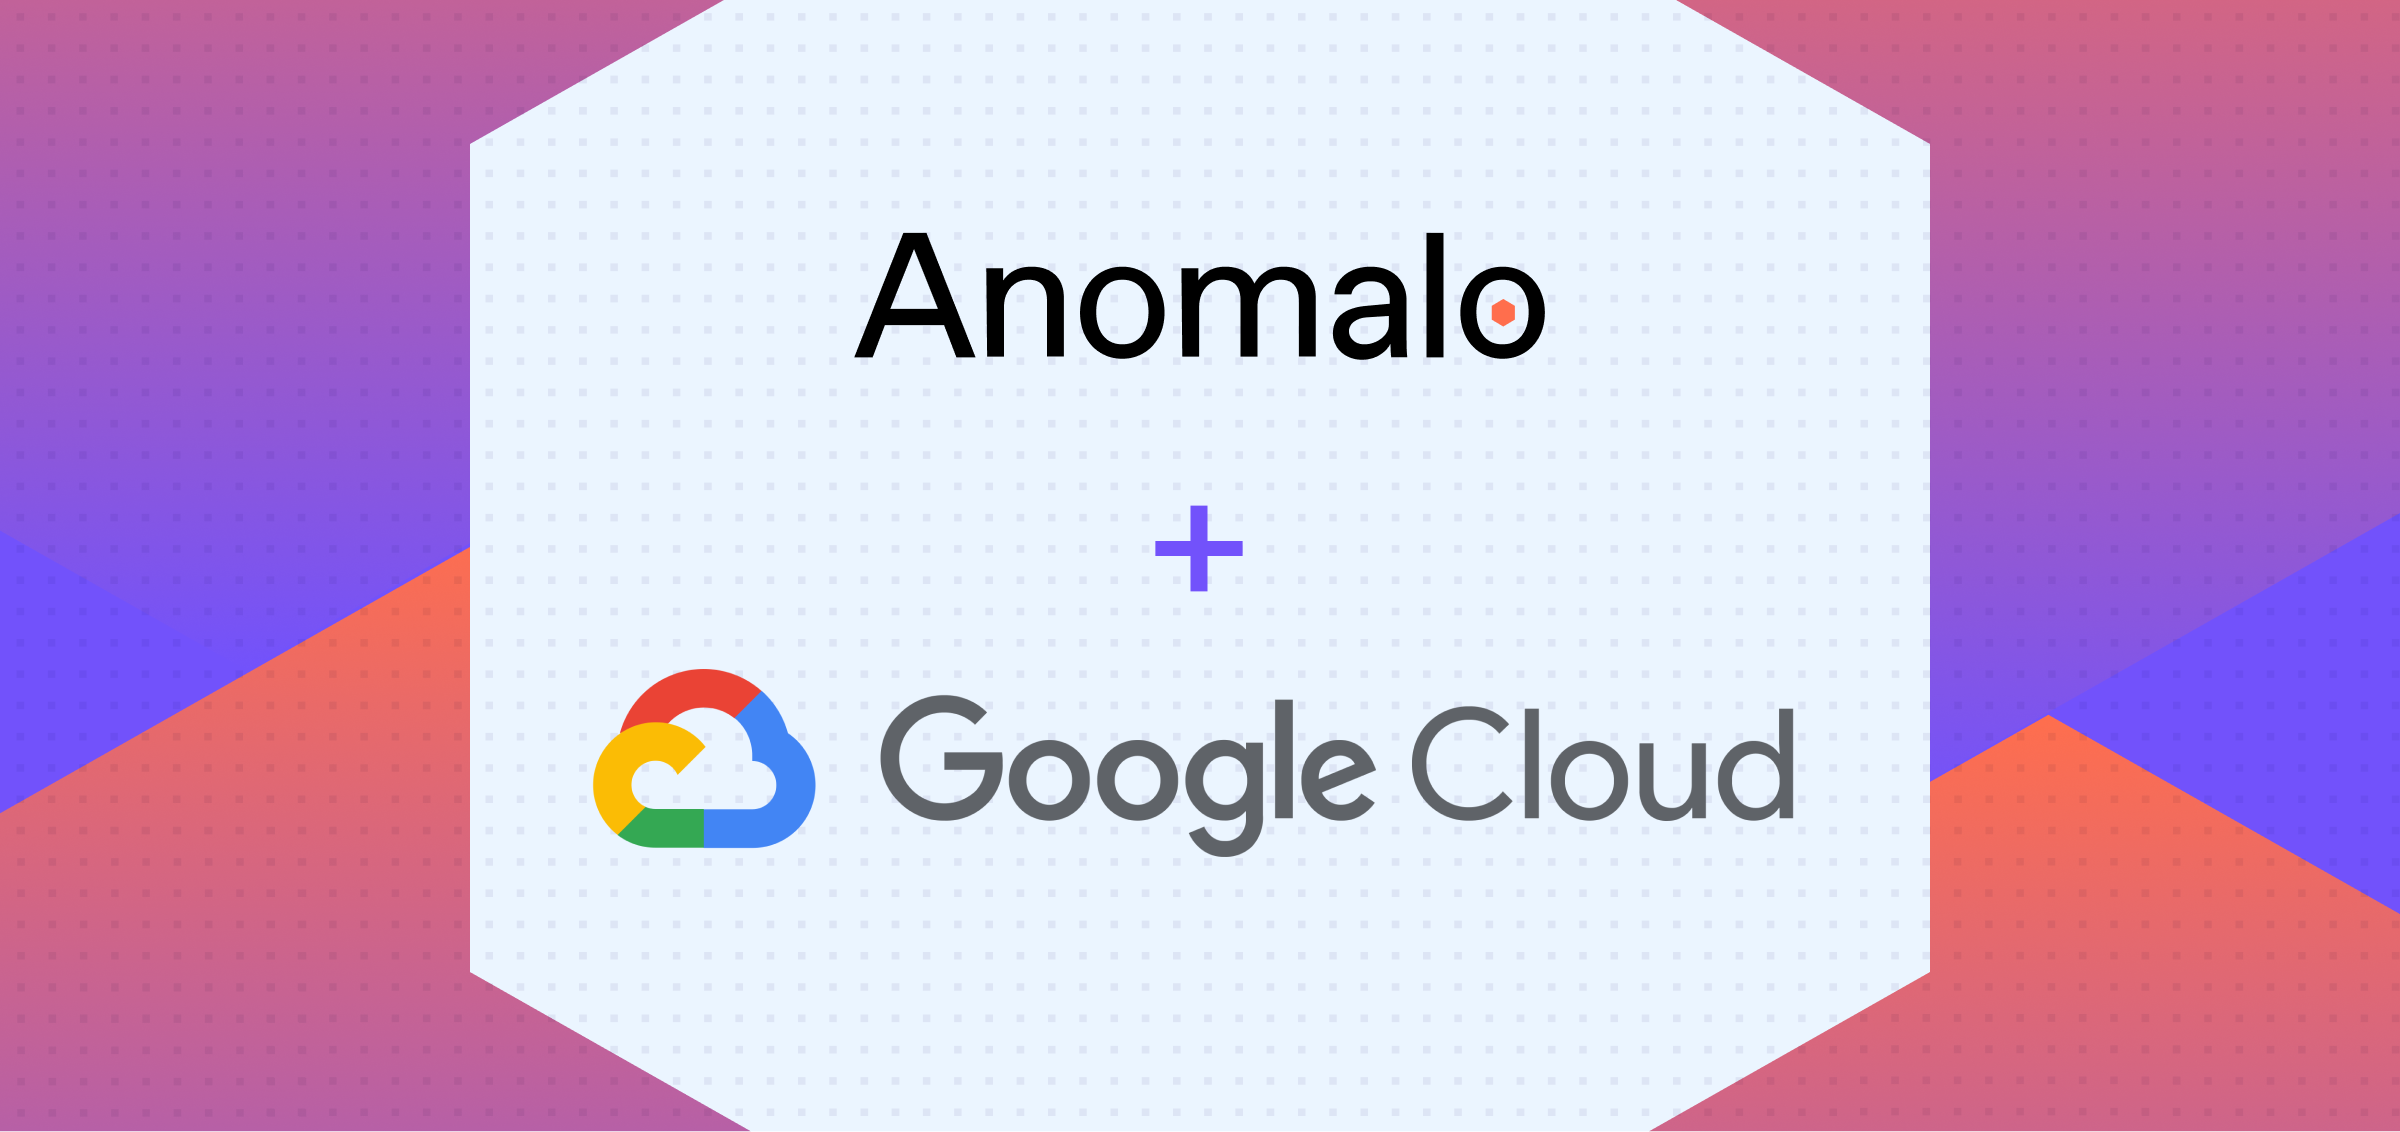 anomalo and google cloud